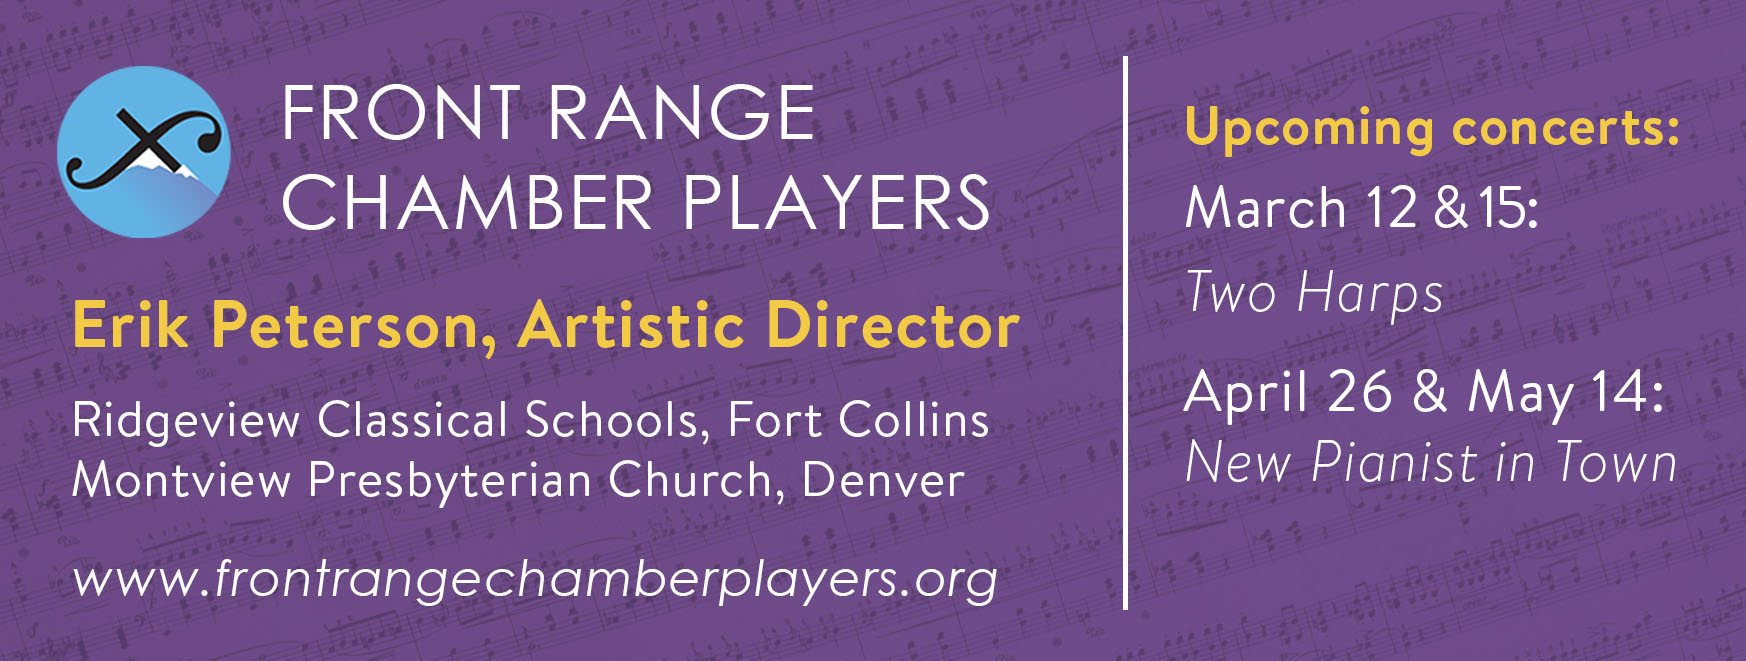 Front Range Chamber Players